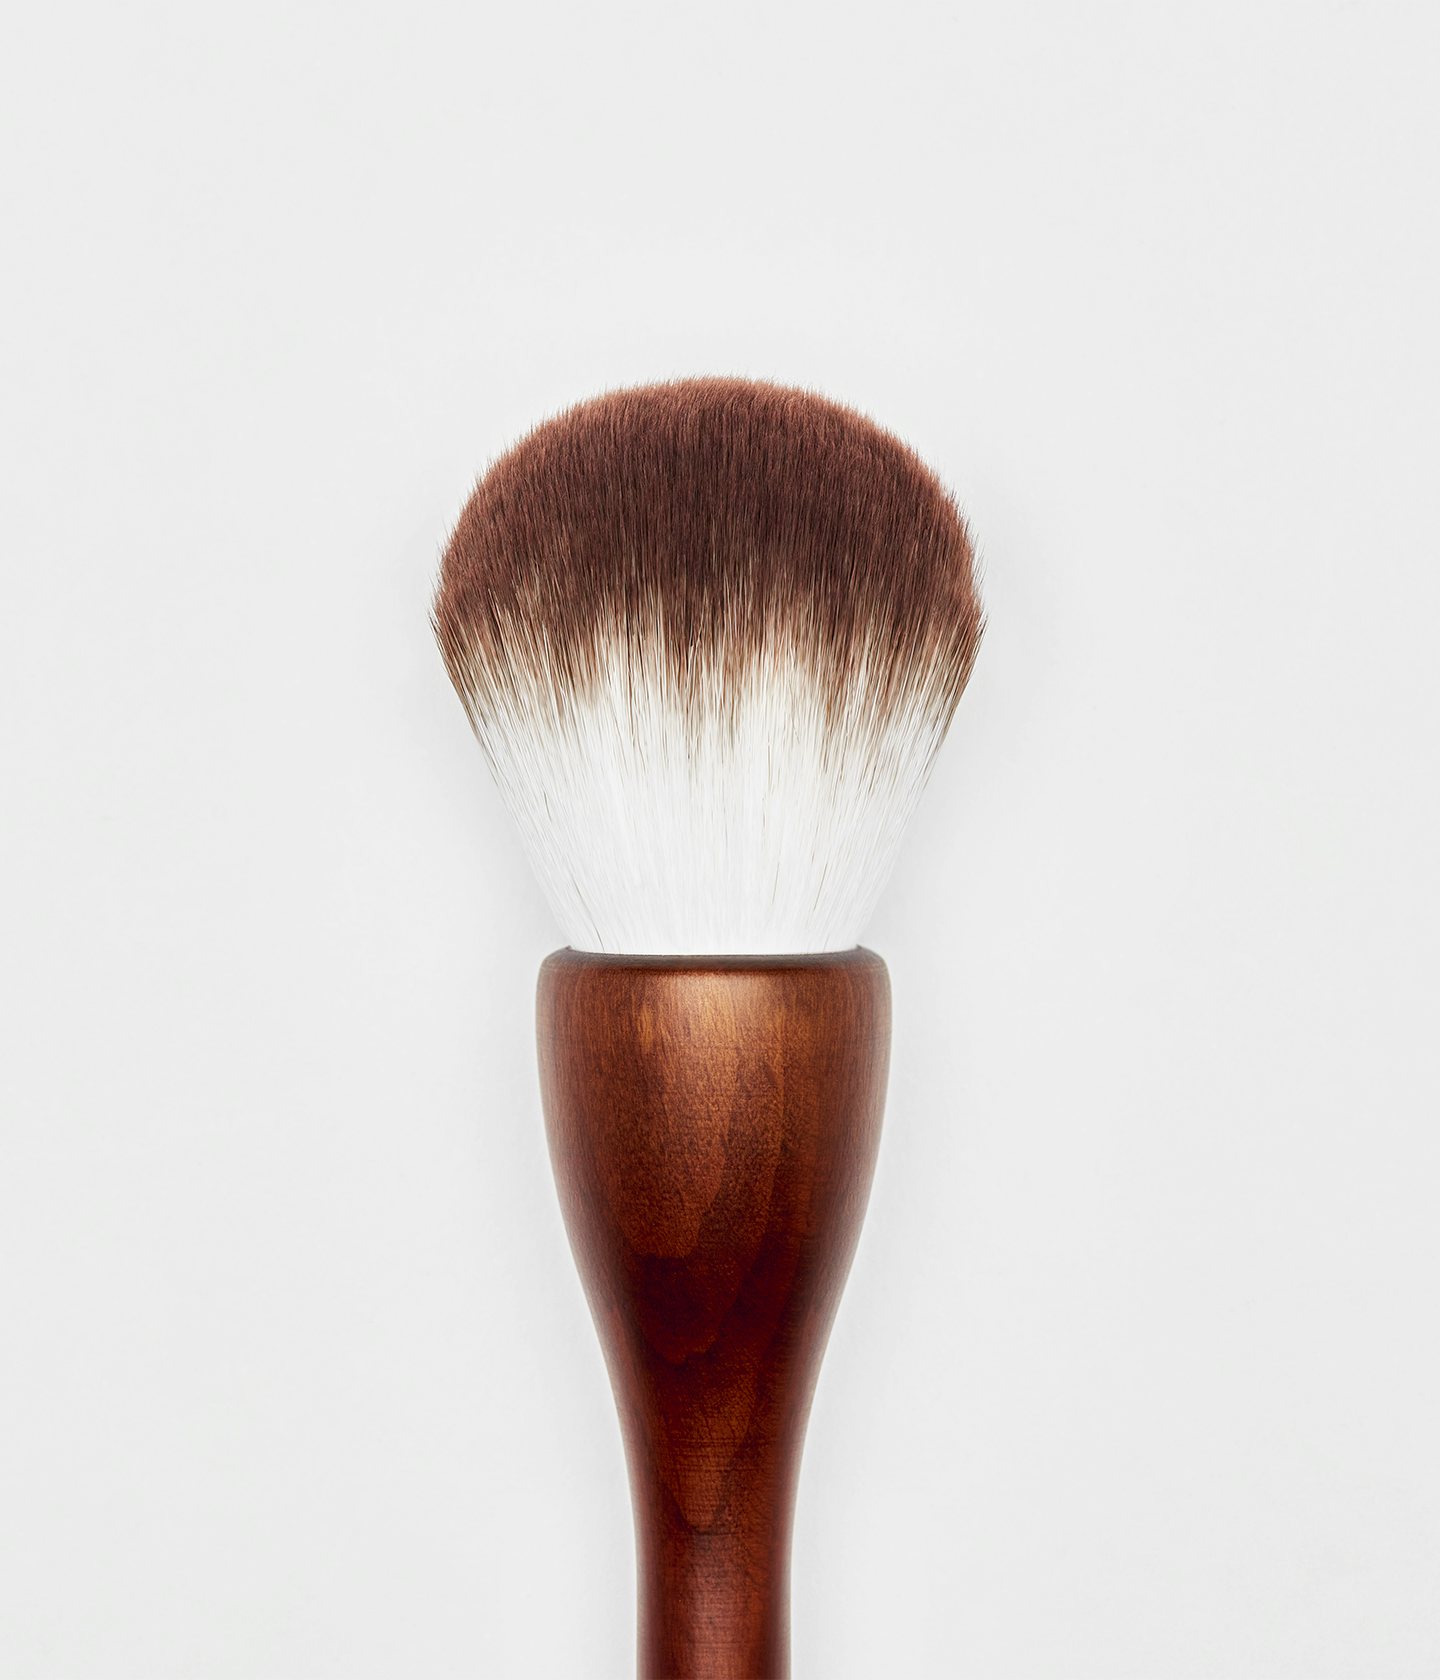 La bouche rouge powder brush zoomed in on the hairs of the brush